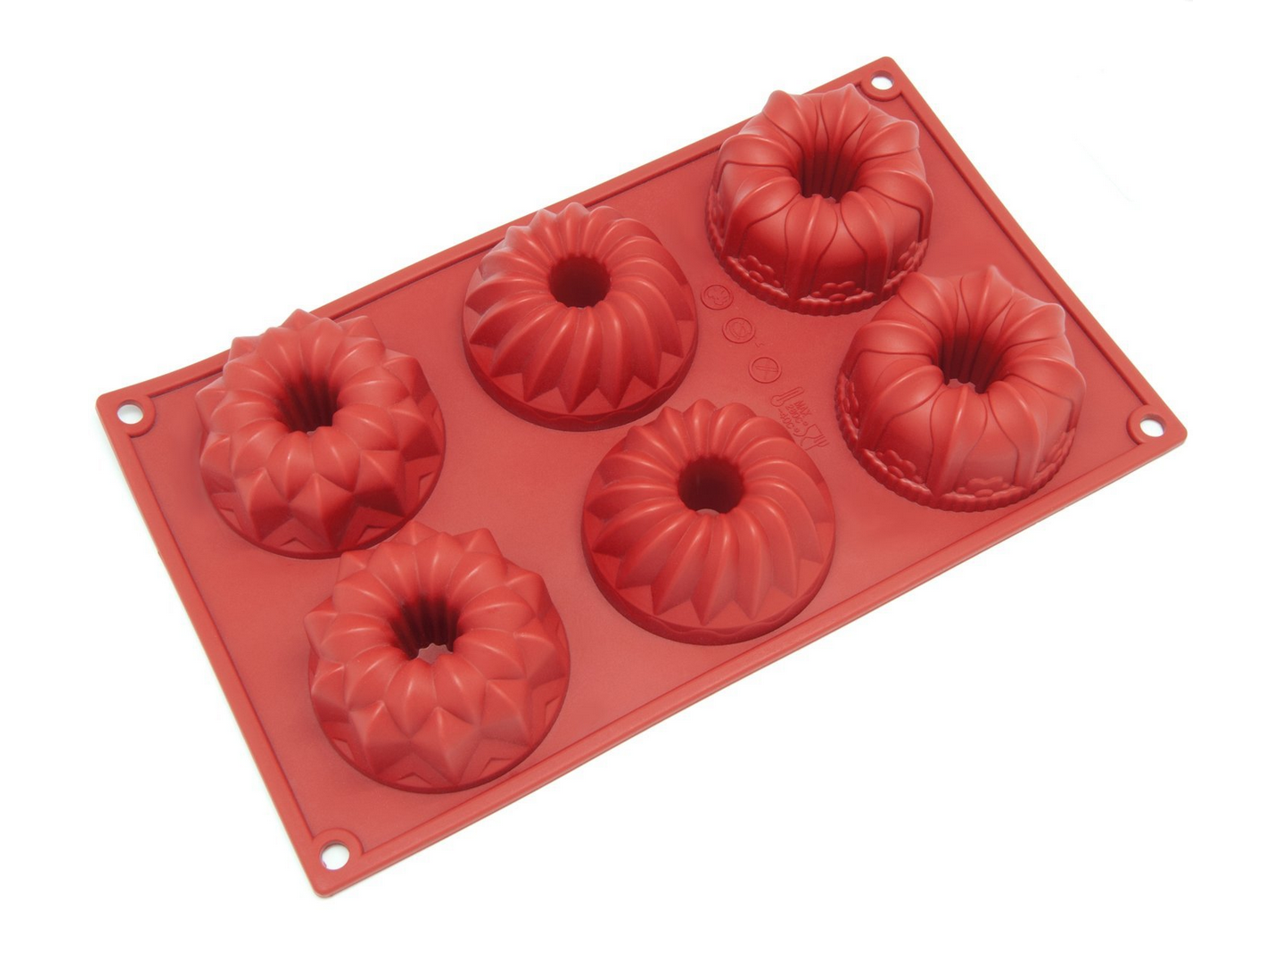 Details about   Silicone Cake Mold Pan 24 Cavity Mini Bundt Baking Savarin Mould Cookie Bakeware 